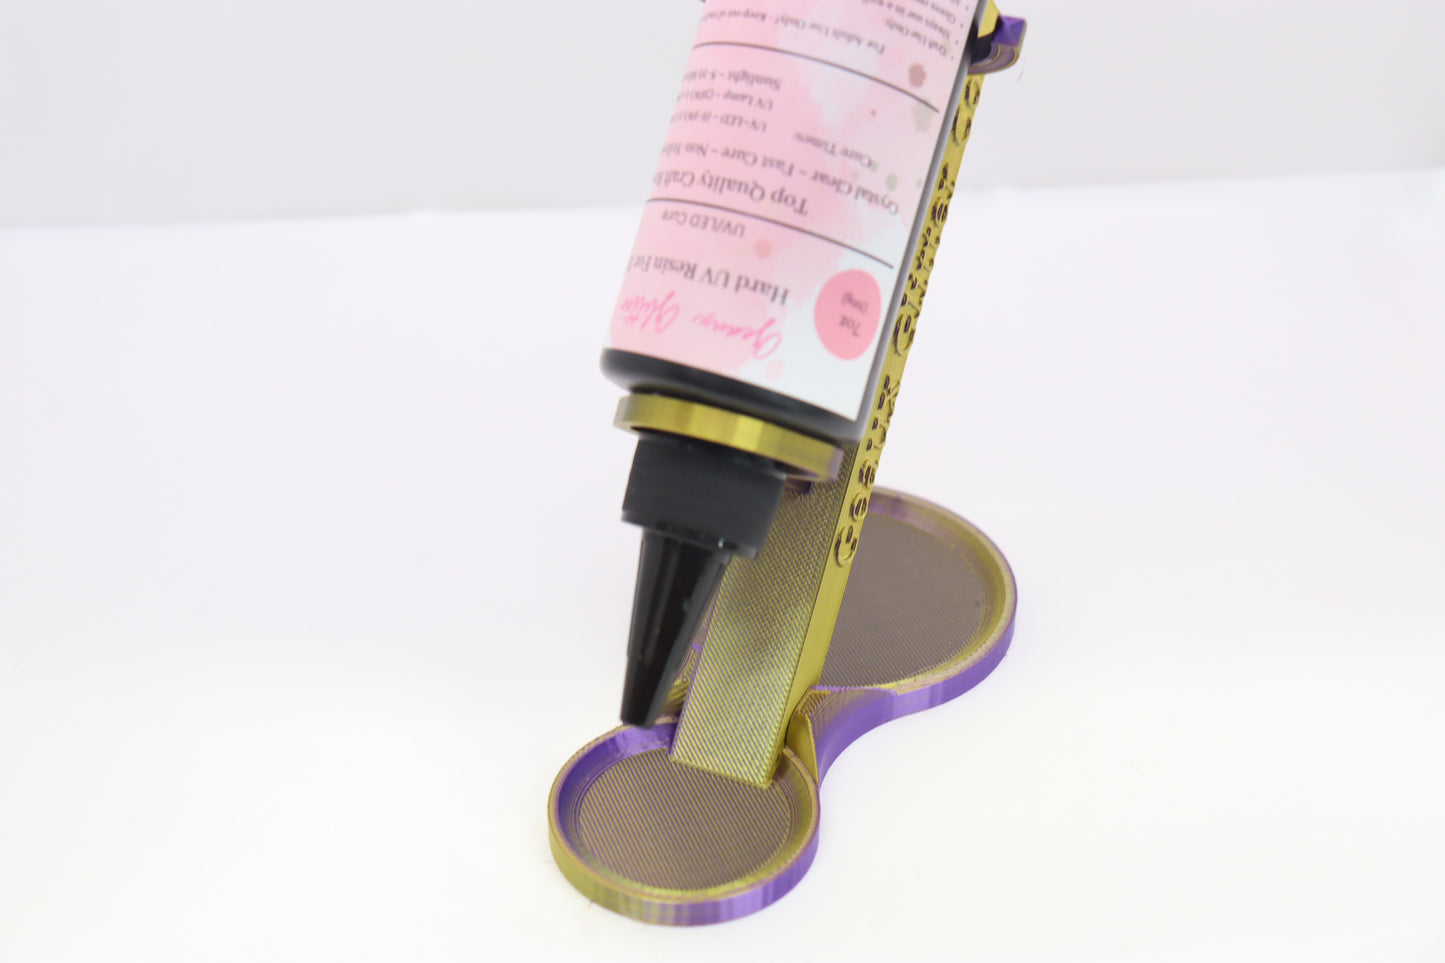 Purple and Gold GG Glue Holder